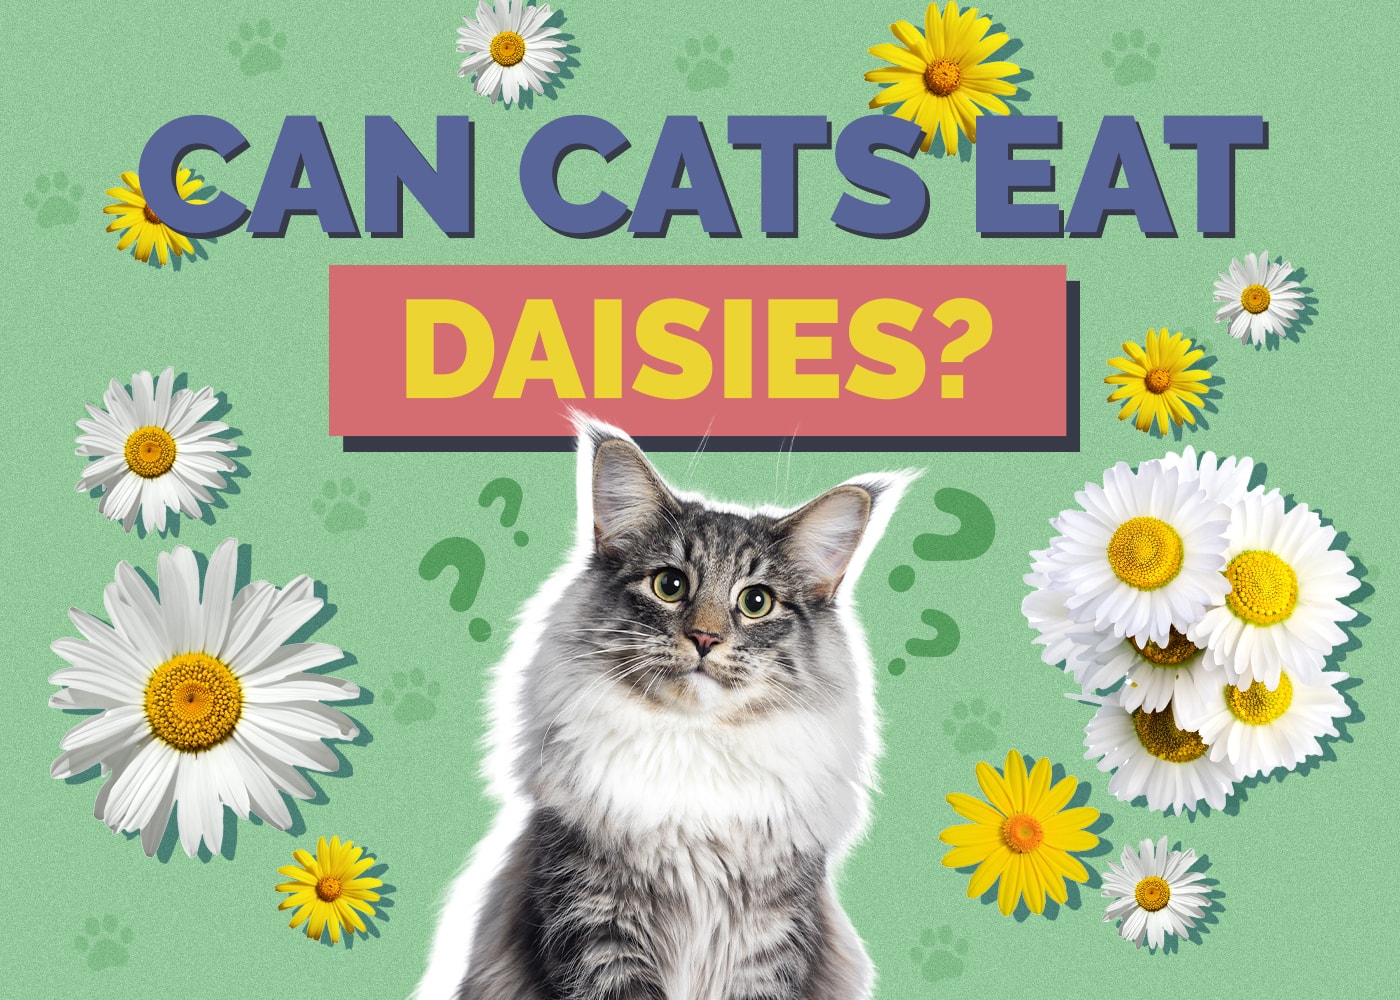 Can Cats Eat daisies